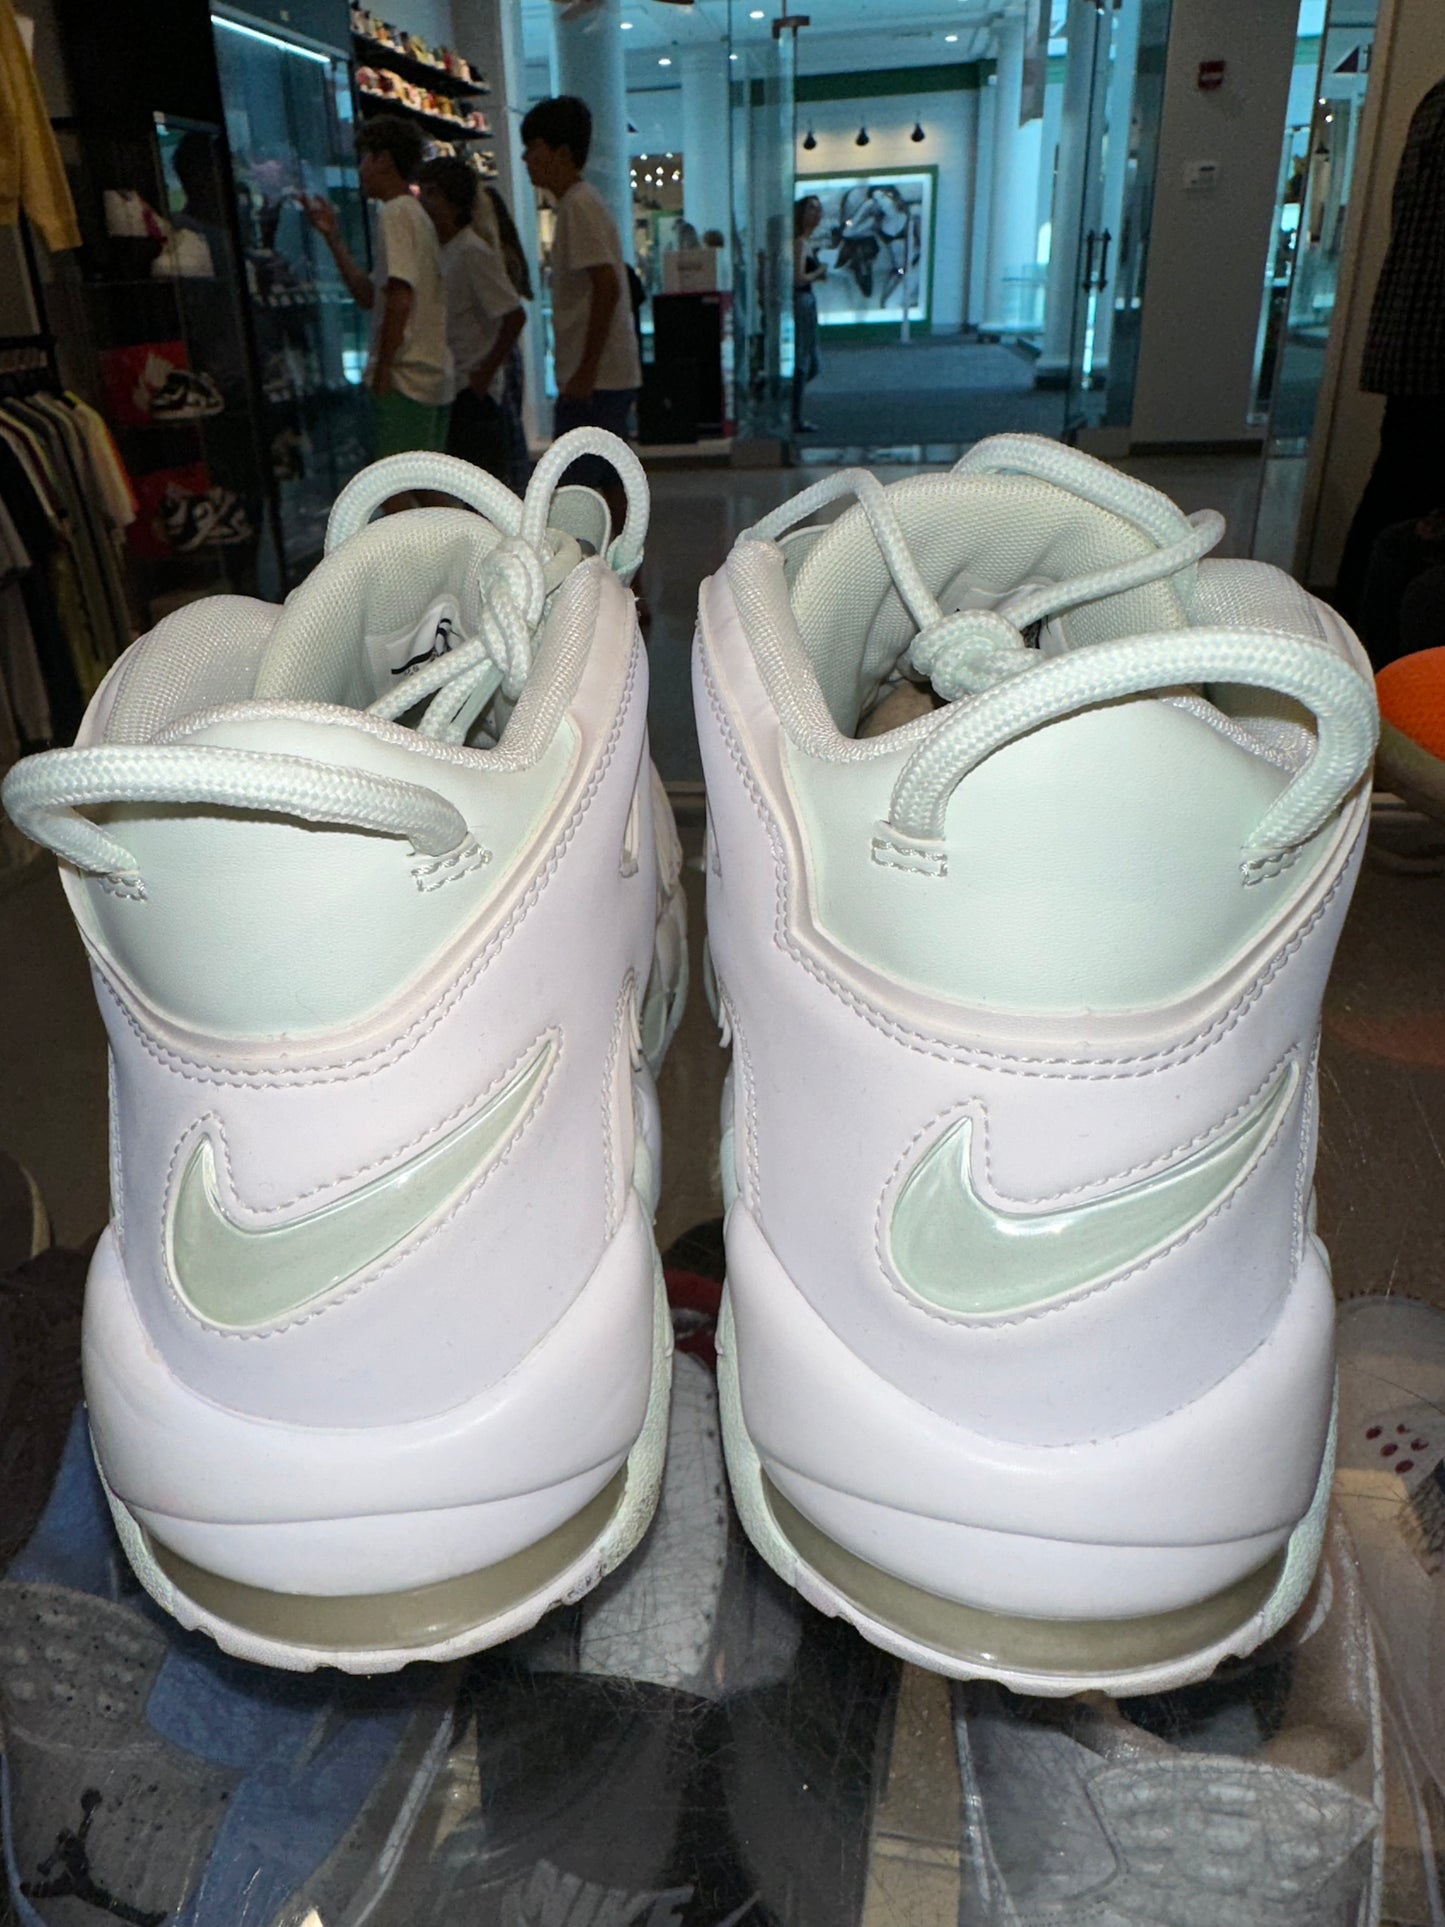 Size 10.5 (12w) Air More Uptempo “Barley Green” (Mall)